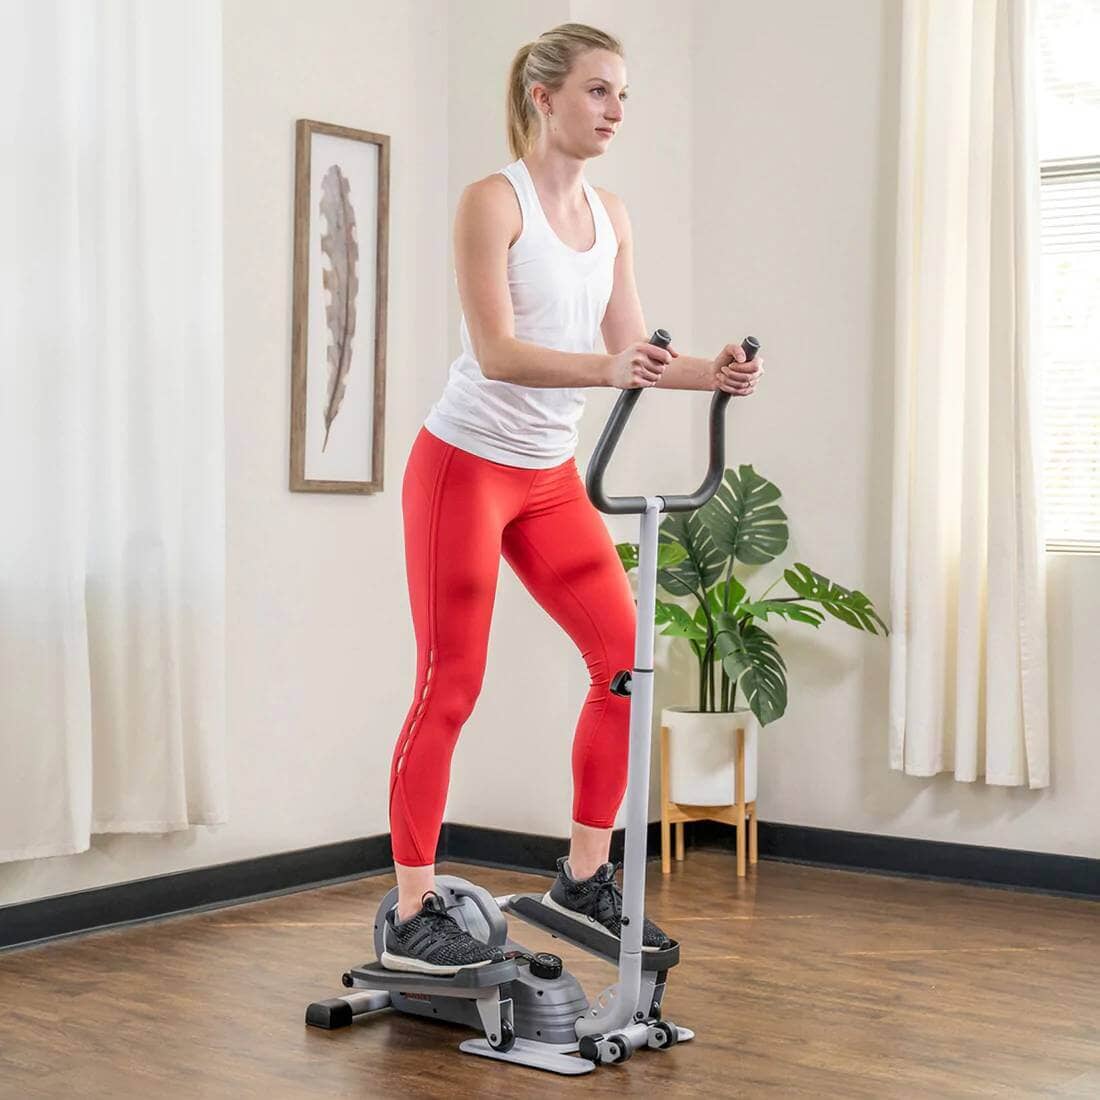 Sunny Health Fitness Lightweight Magnetic Elliptical - Compact Cross Trainer-Adjustable Resistance